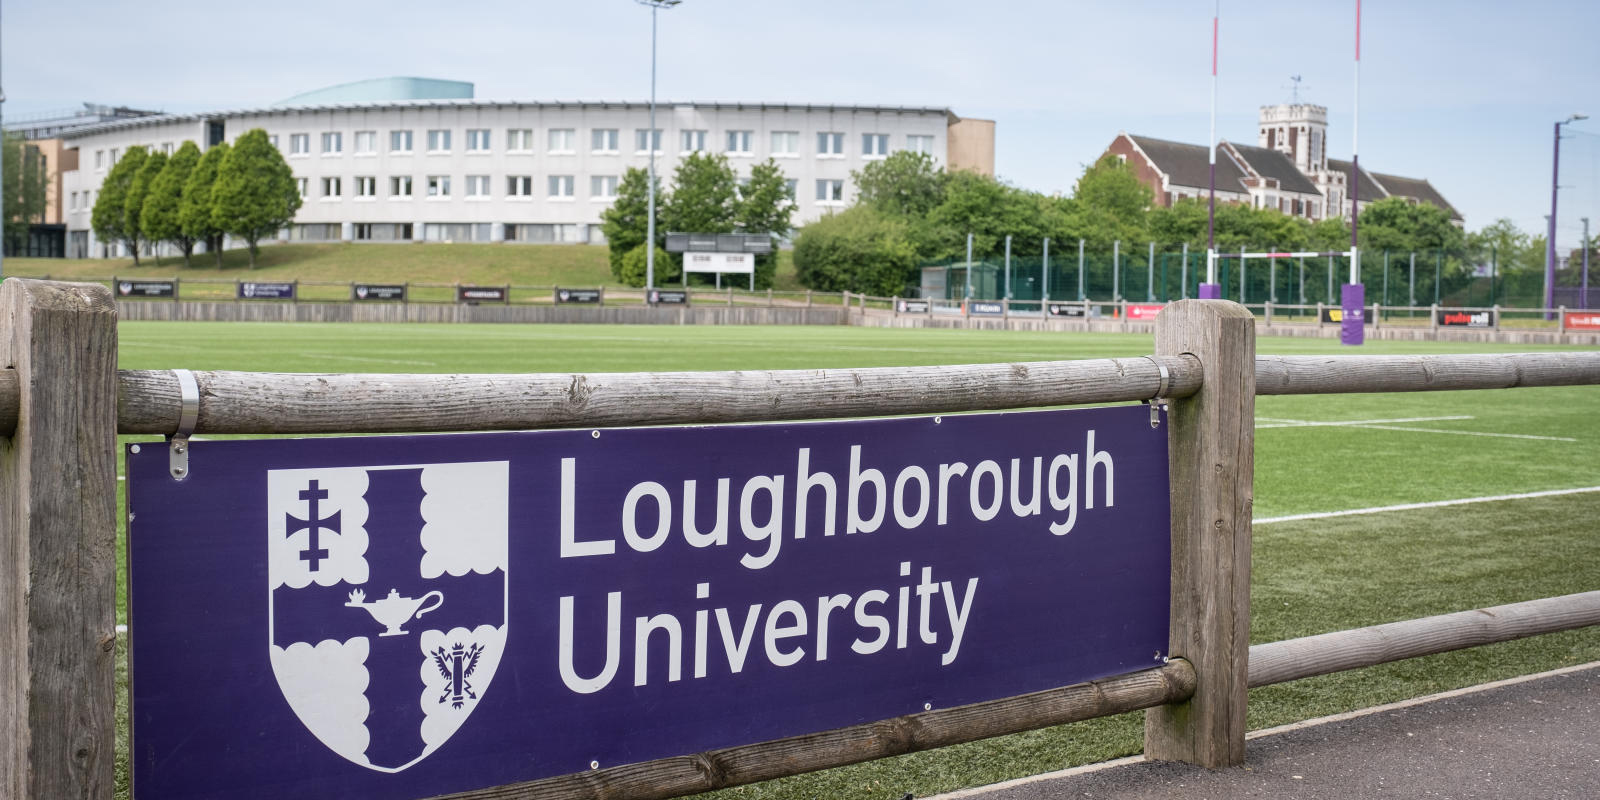 A Loughborough University sign in front of a rugby pitch